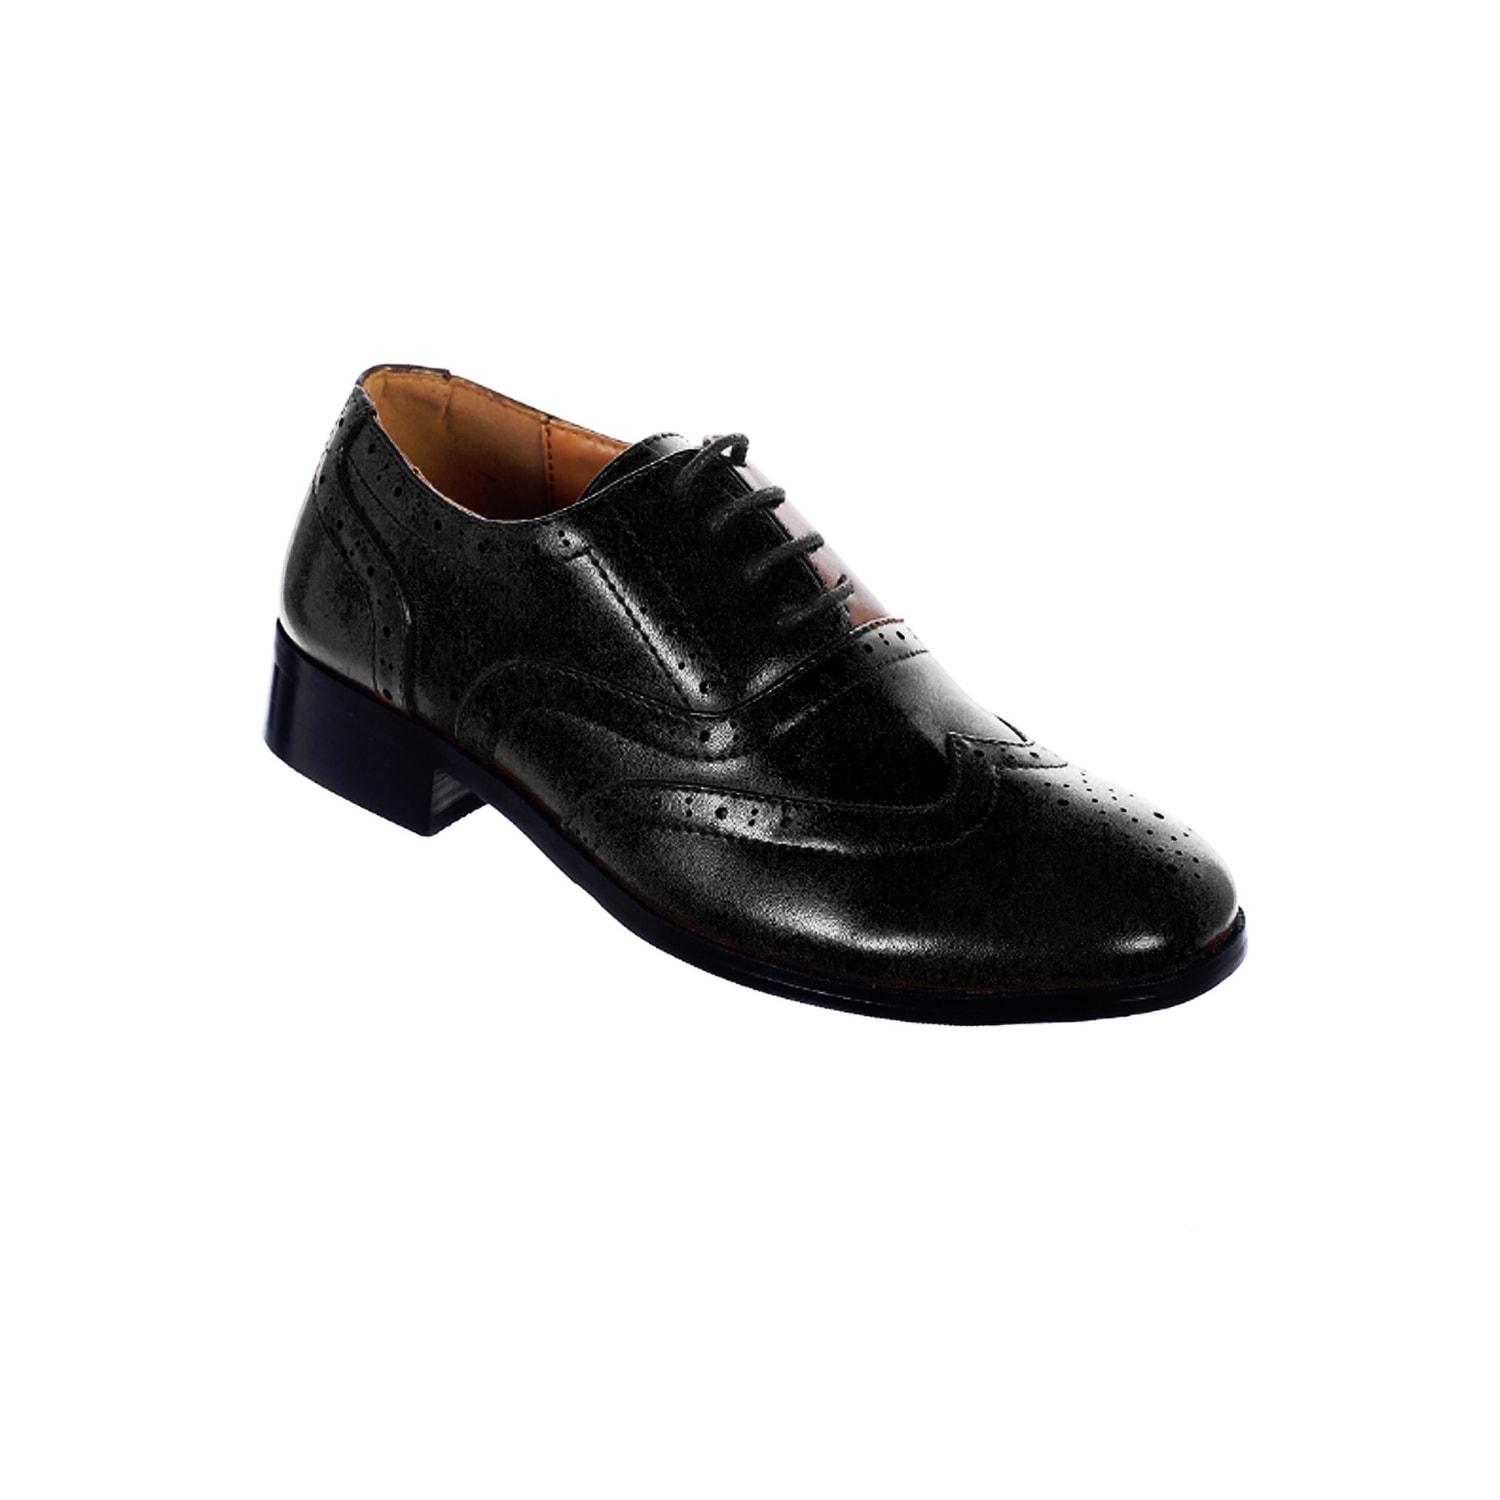 formal black shoes without laces